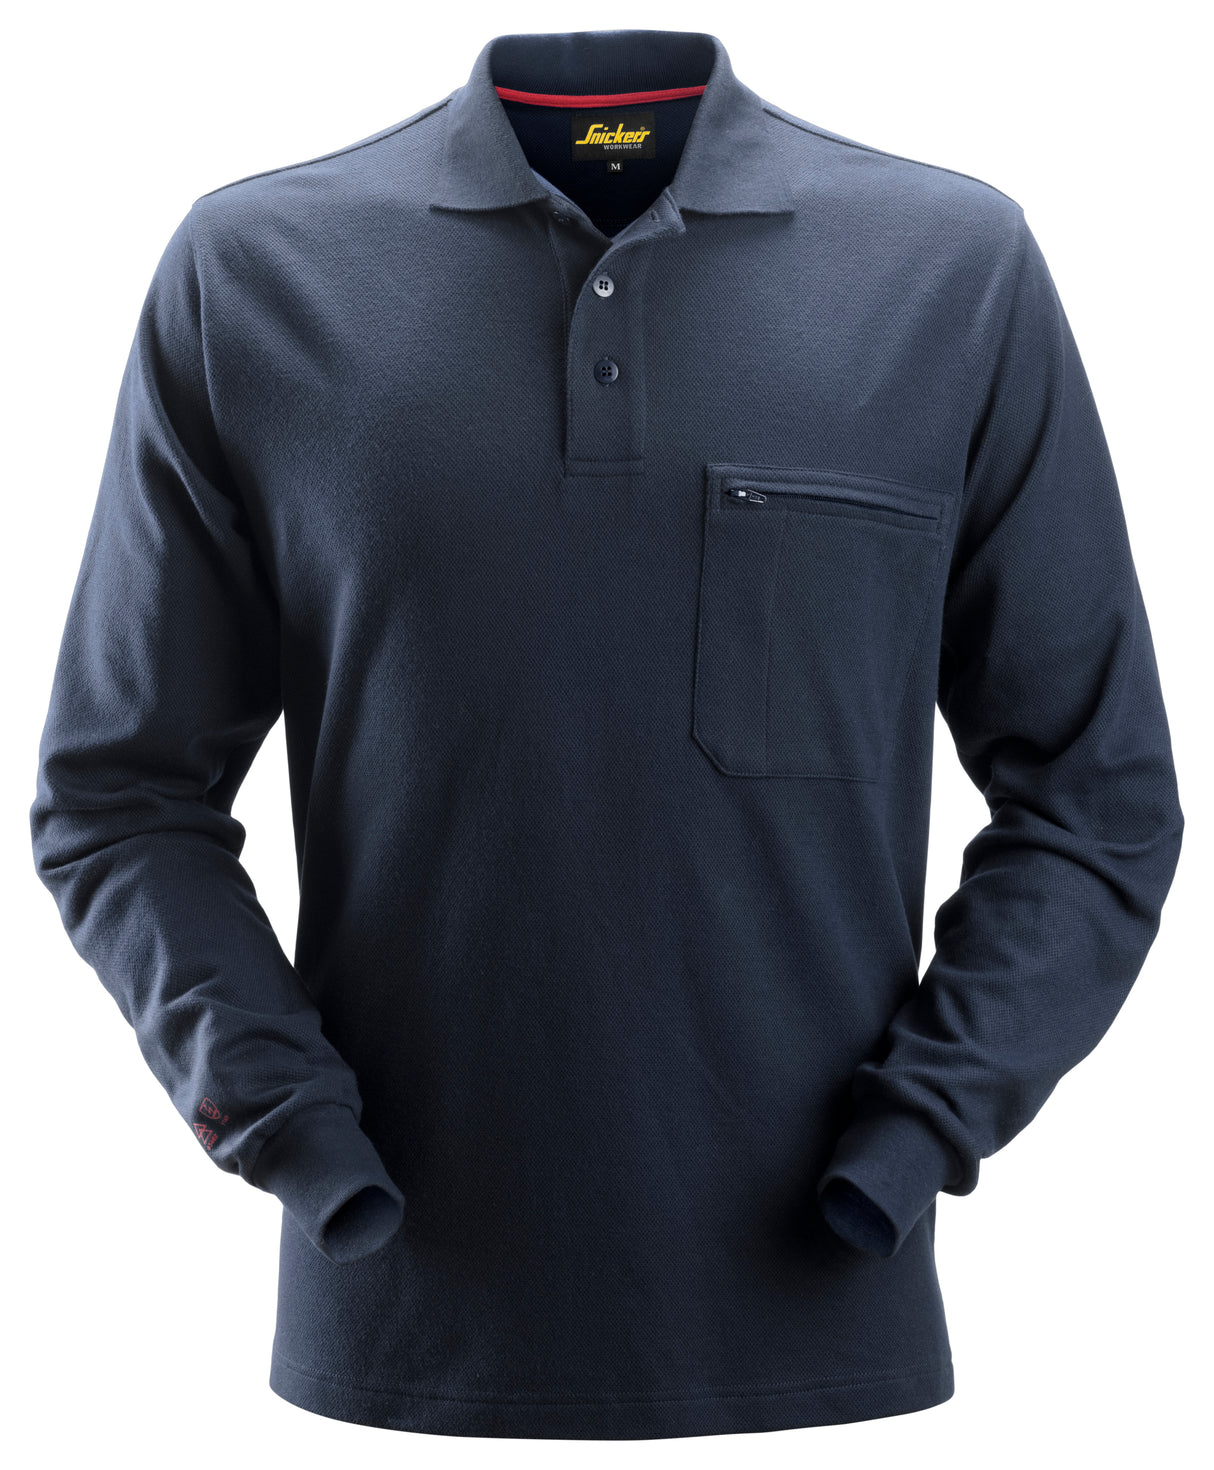 Snickers 2660 Protecwork Long Sleeve Polo Shirt